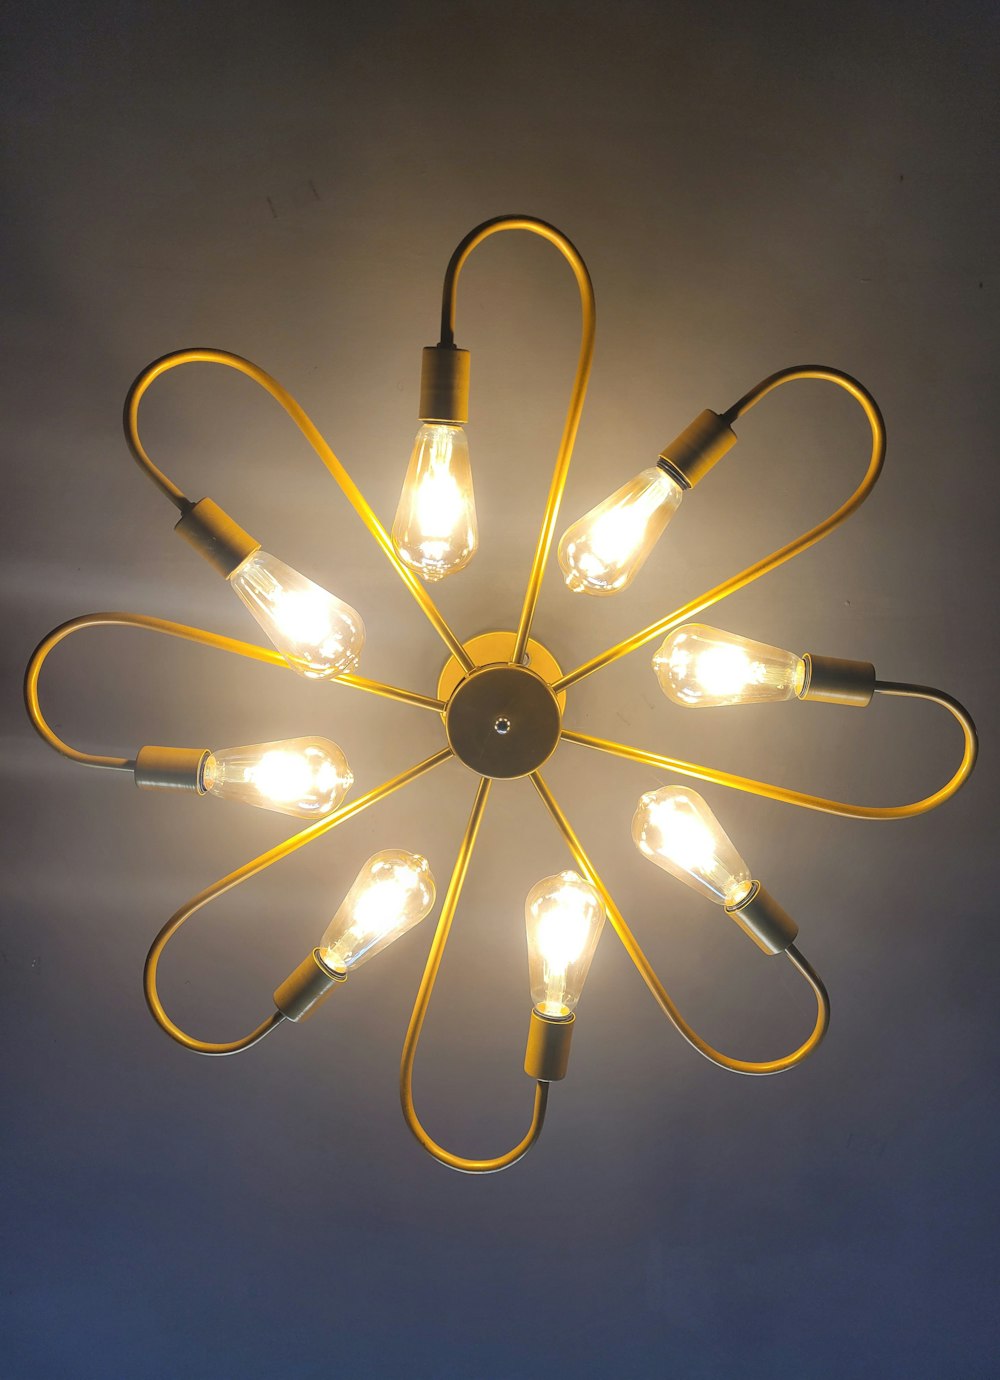 a circular light fixture with a bunch of lights on it